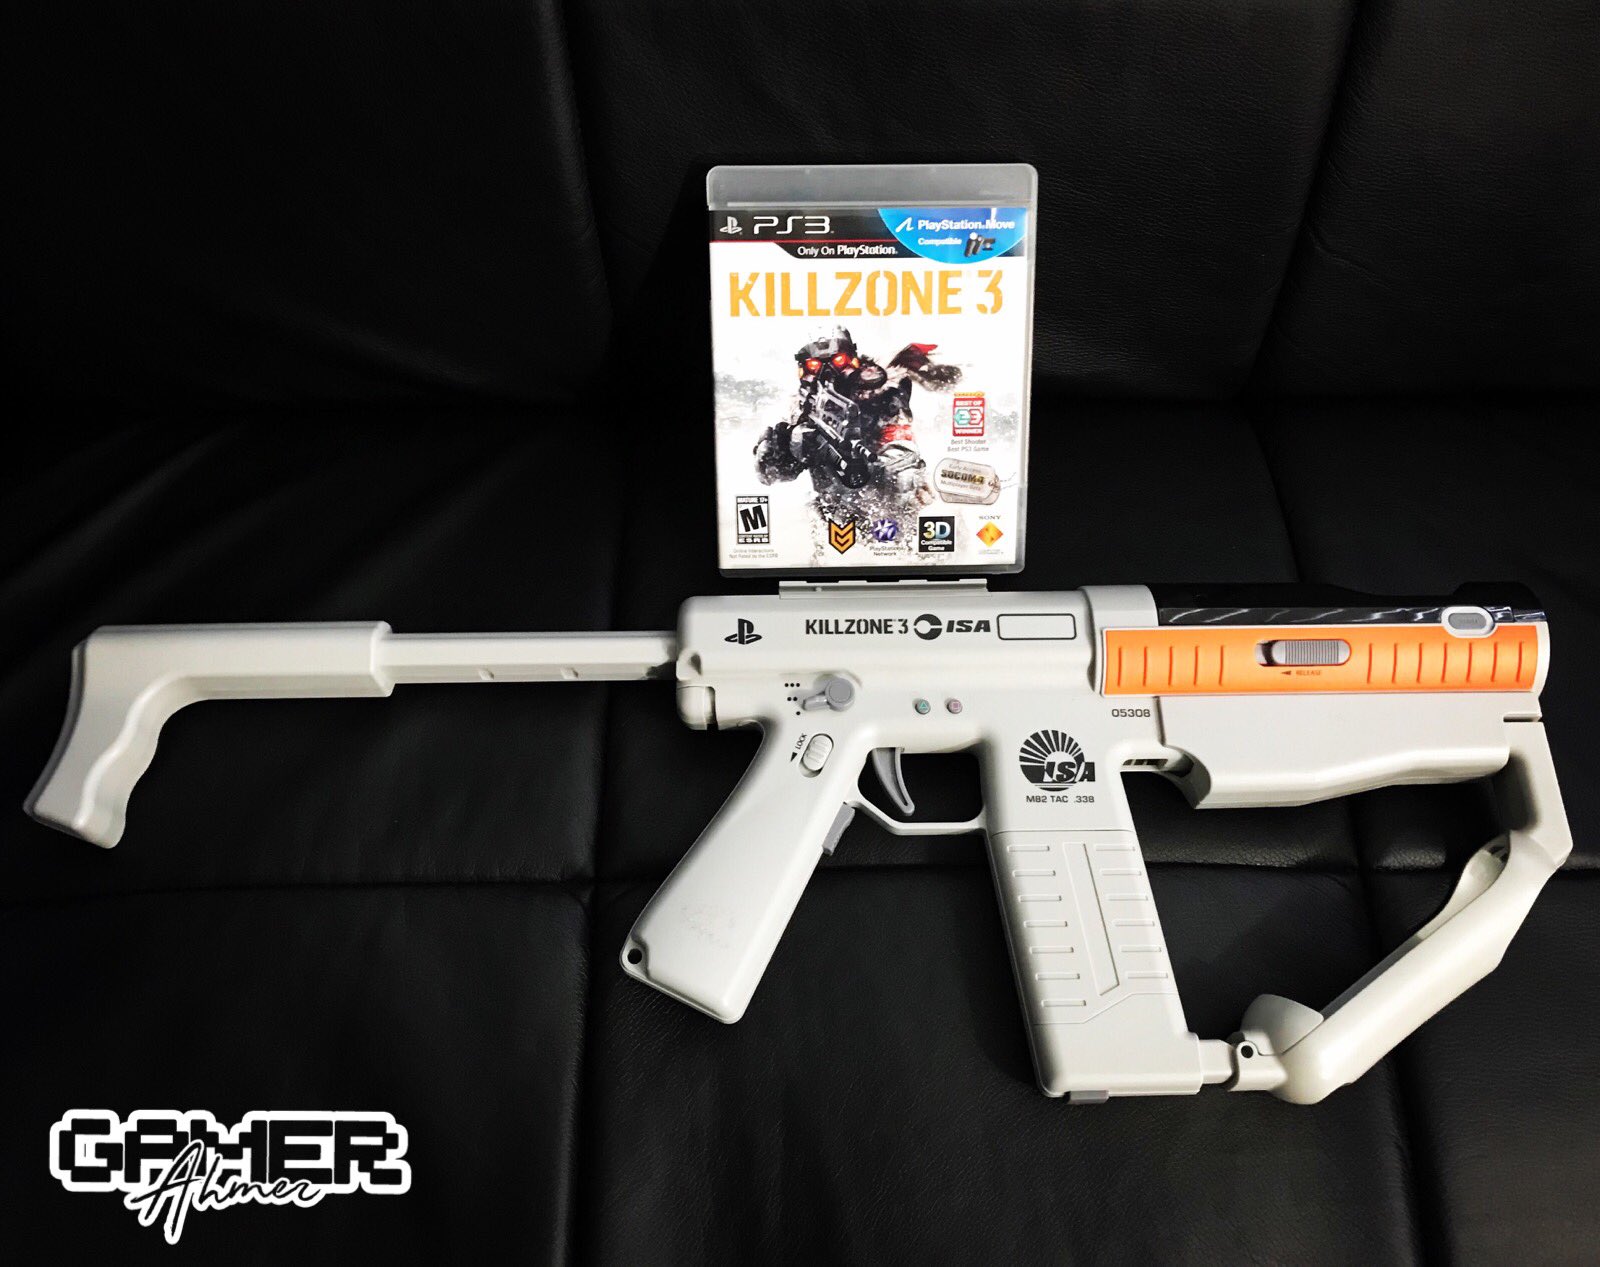 XBrandalionX on Twitter: "How about some Killzone 3 with this Gun Controller for the PS3!#guncontroller #playstation #playstation3 #ps3 #killzone #killzone3 #collection #gameroom #gamer #gamerahmer # games #gaming #gamingcommunity ...